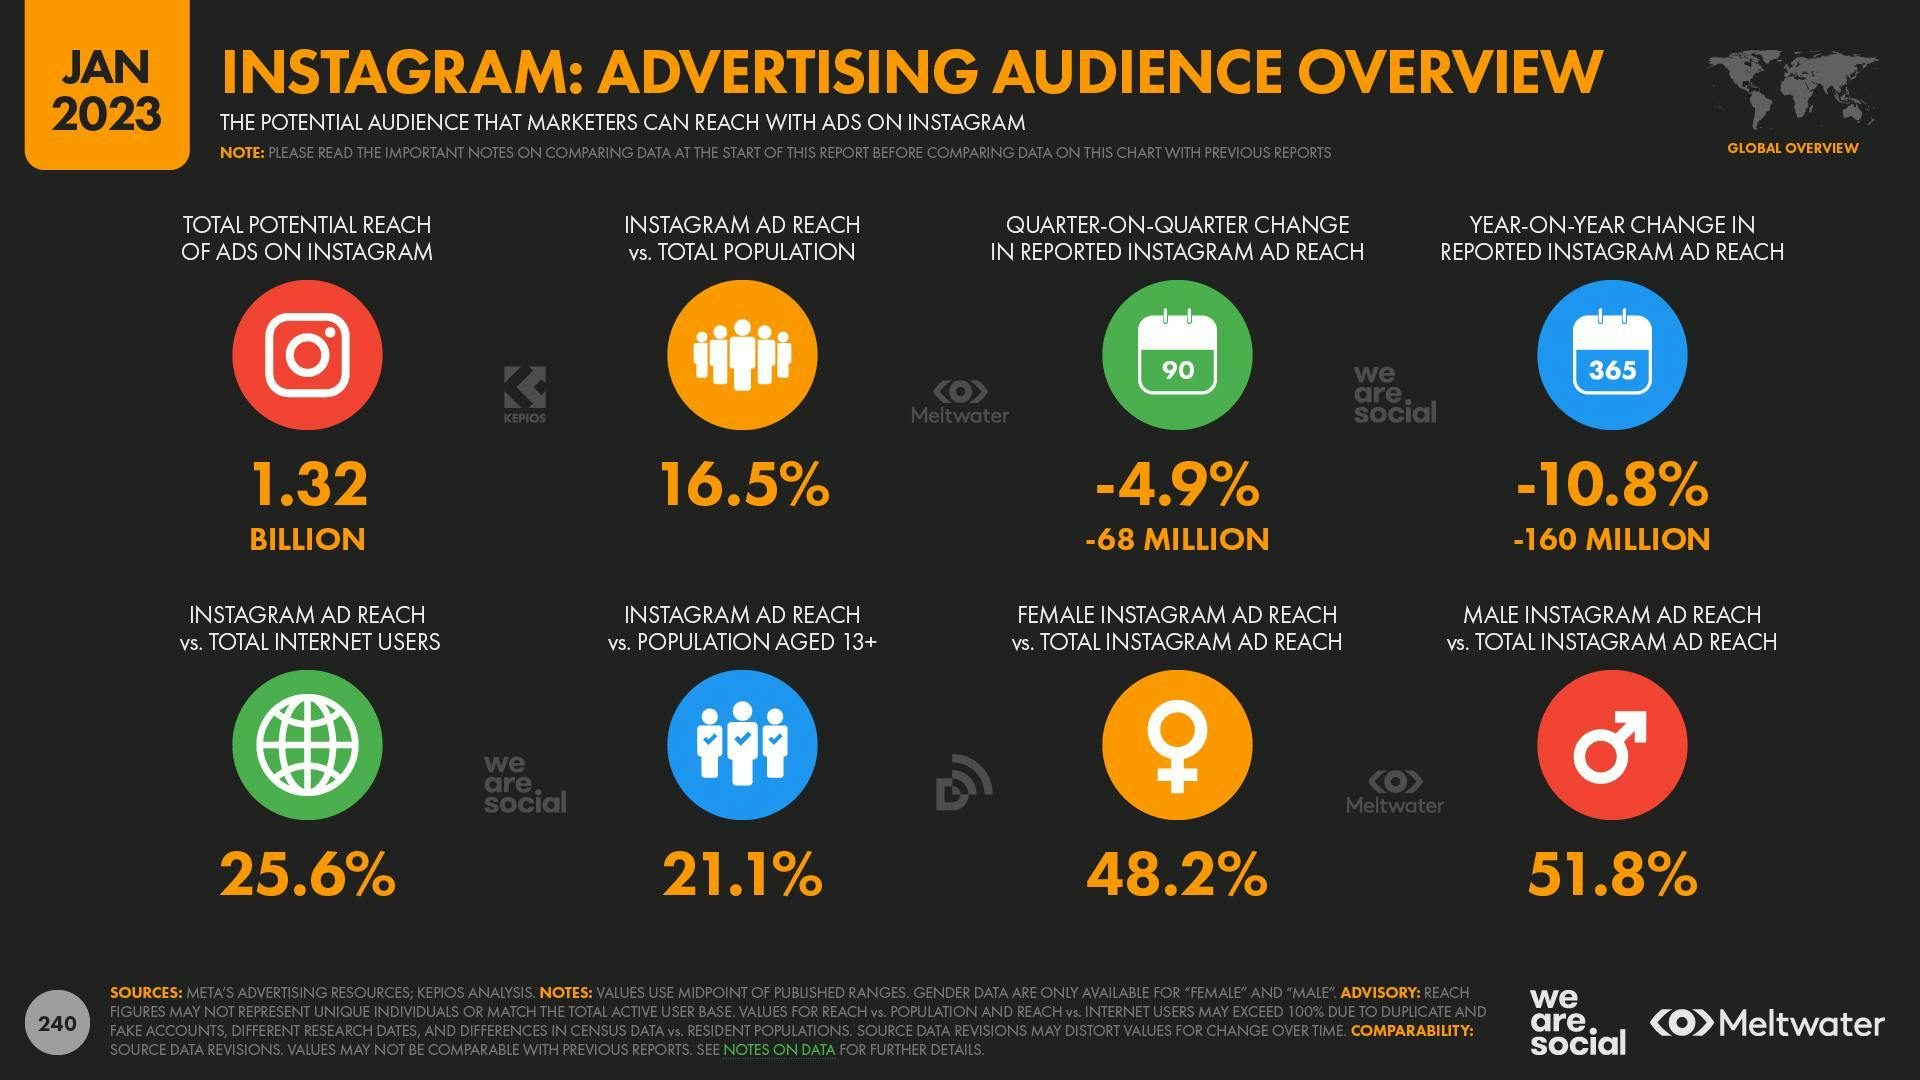 Instagram: Advertising audience overview 2023